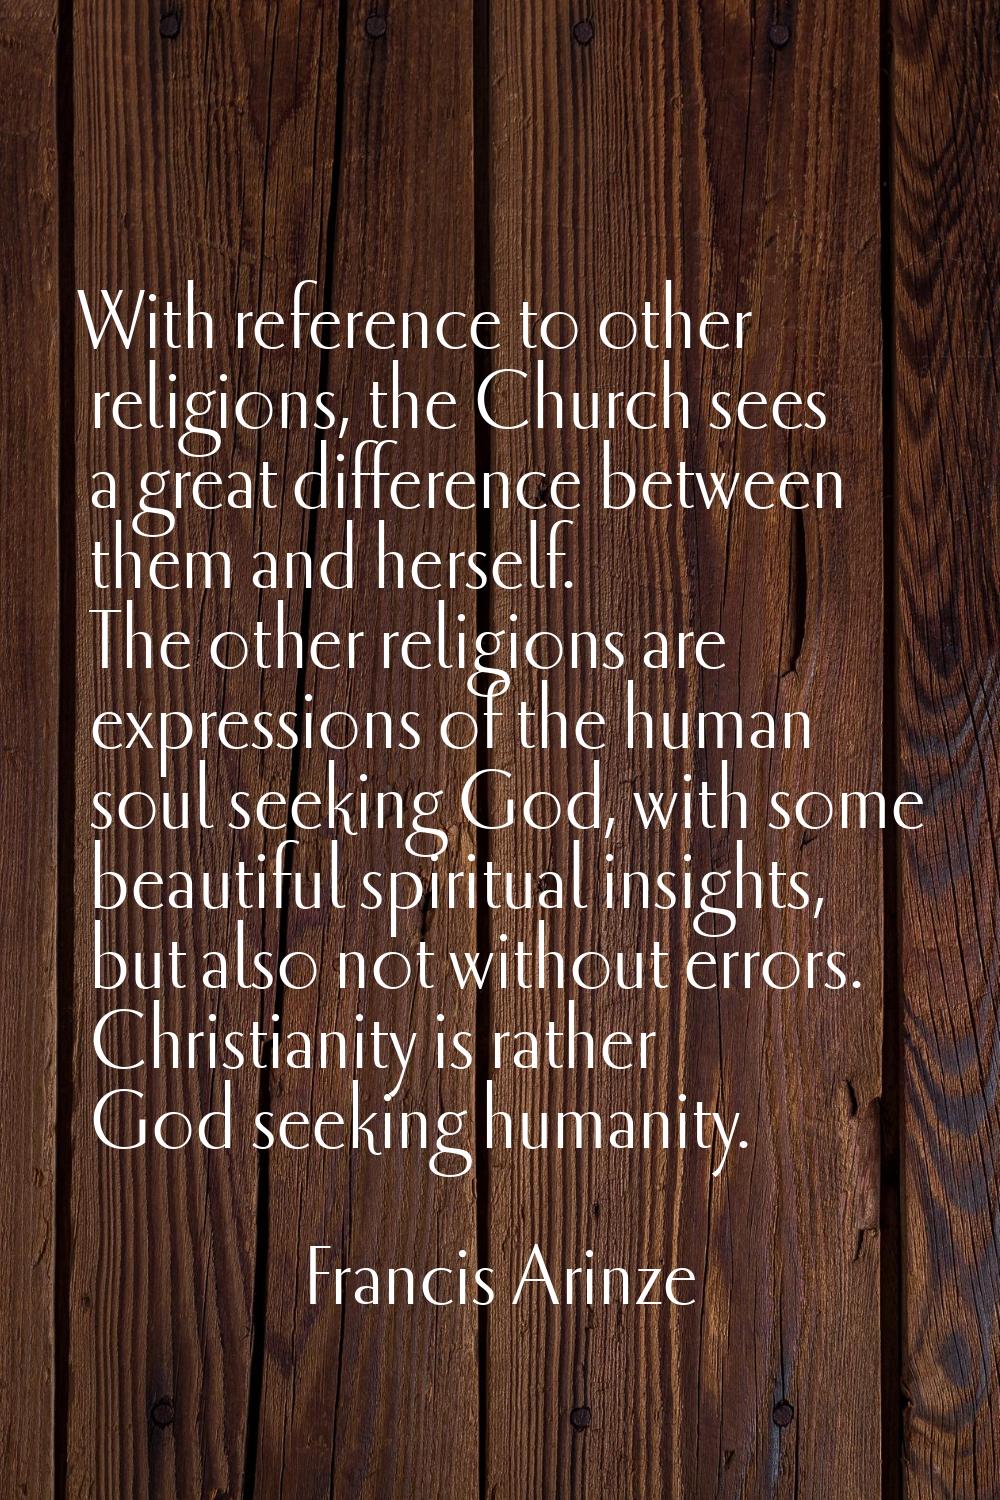 With reference to other religions, the Church sees a great difference between them and herself. The